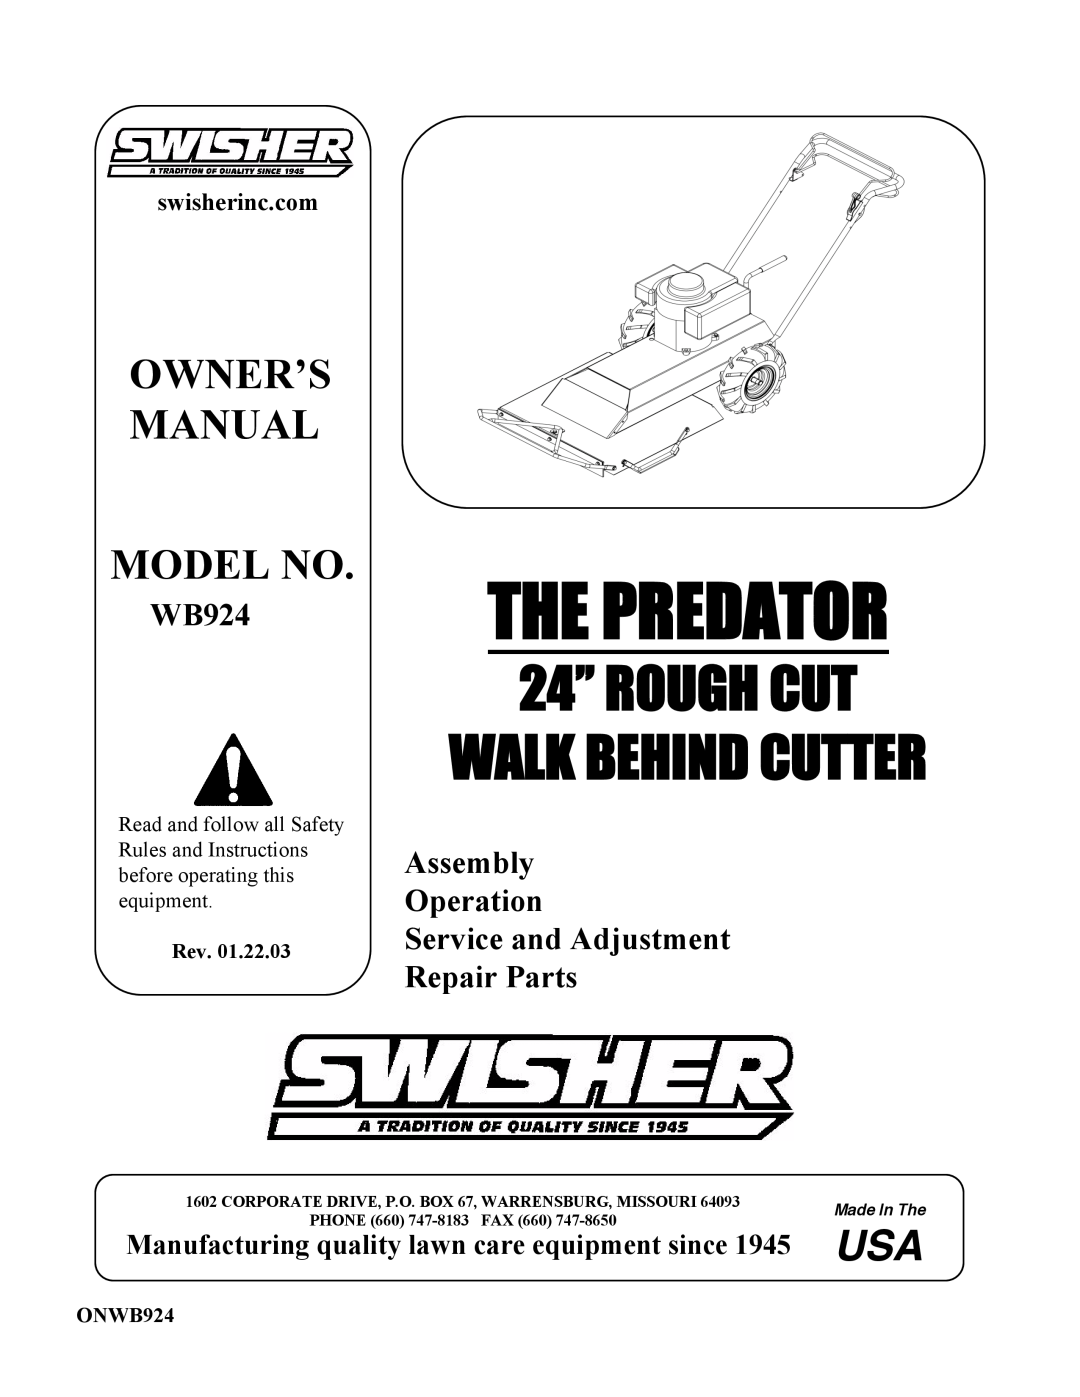 Swisher WB924 owner manual Assembly Operation Service and Adjustment, Repair Parts, swisherinc.com, The Predator 